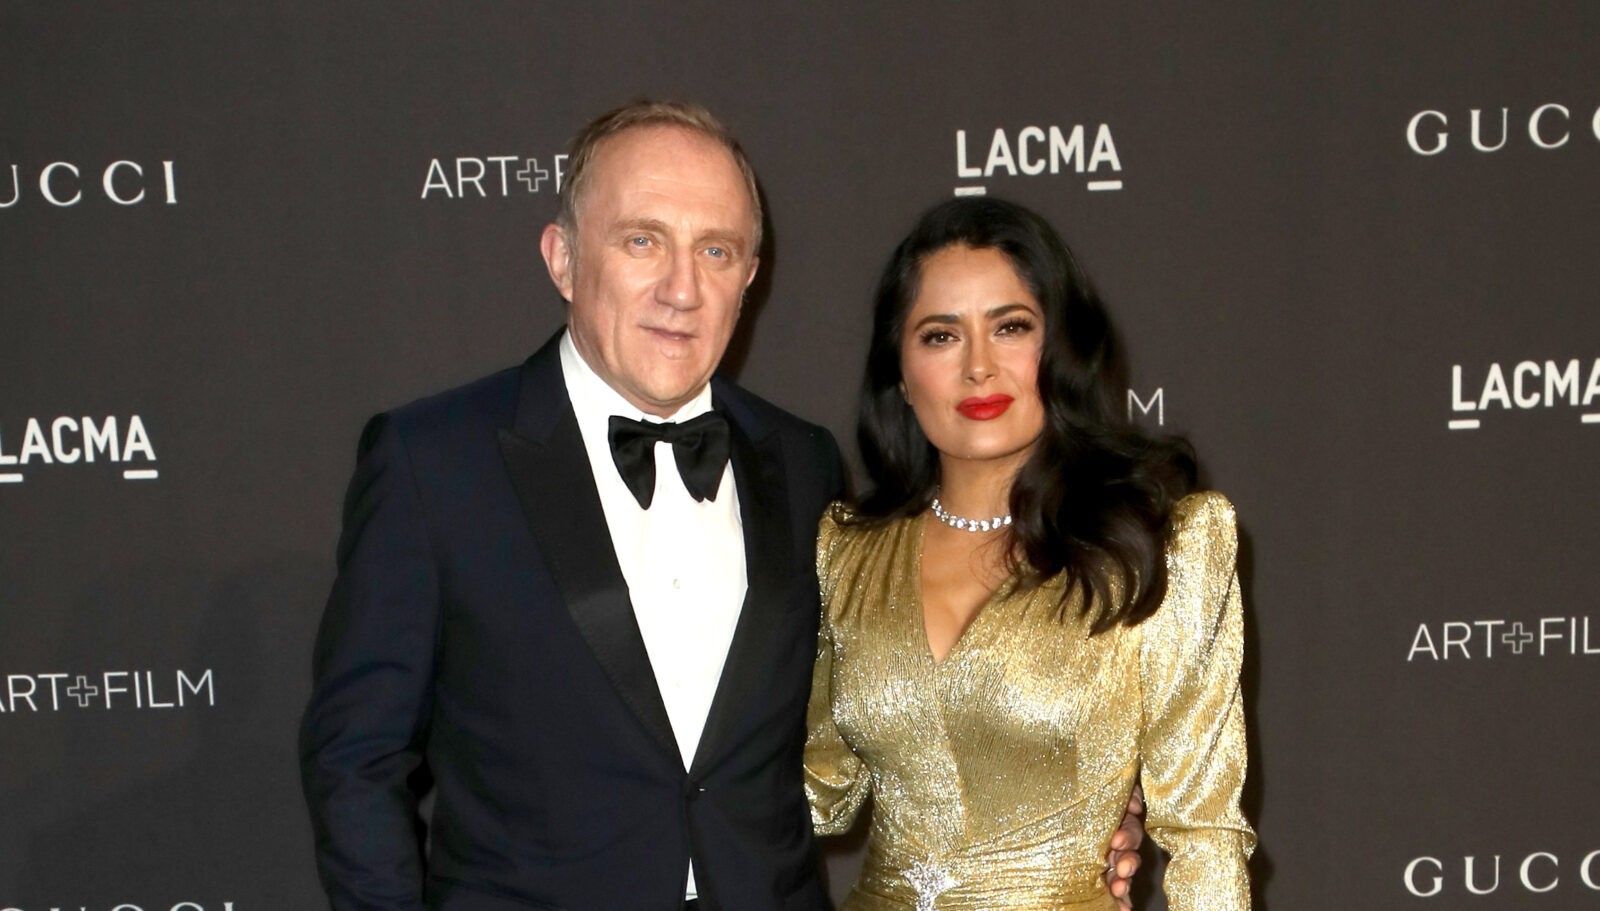 Who Is Salma Hayek's Husband? A Look Into Their Relationship